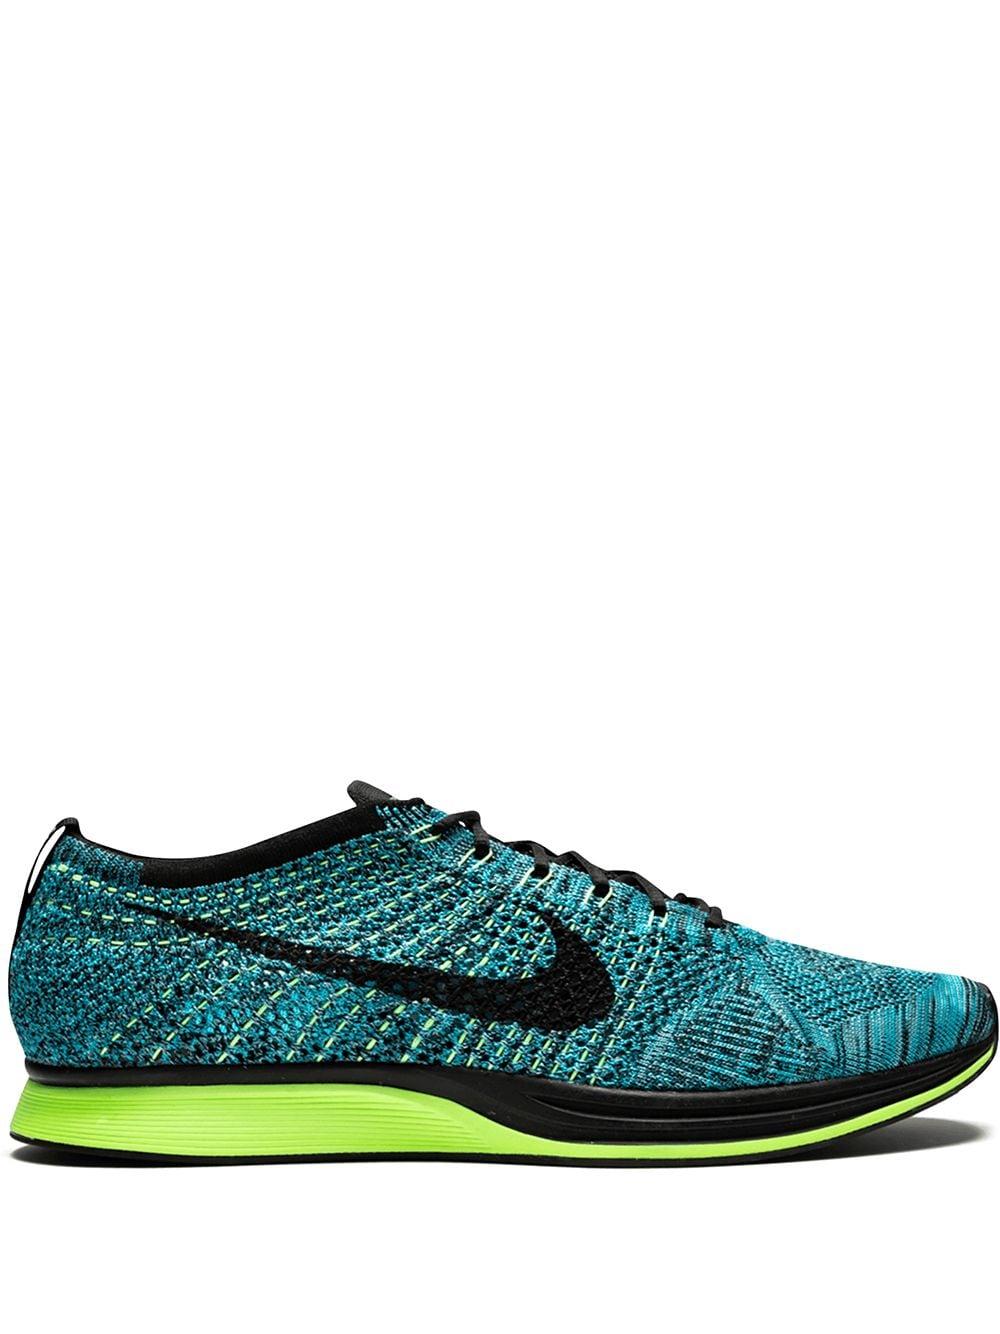 Nike Flyknit Racer 'blue Lagoon' Shoes for Men - Save 6% | Lyst